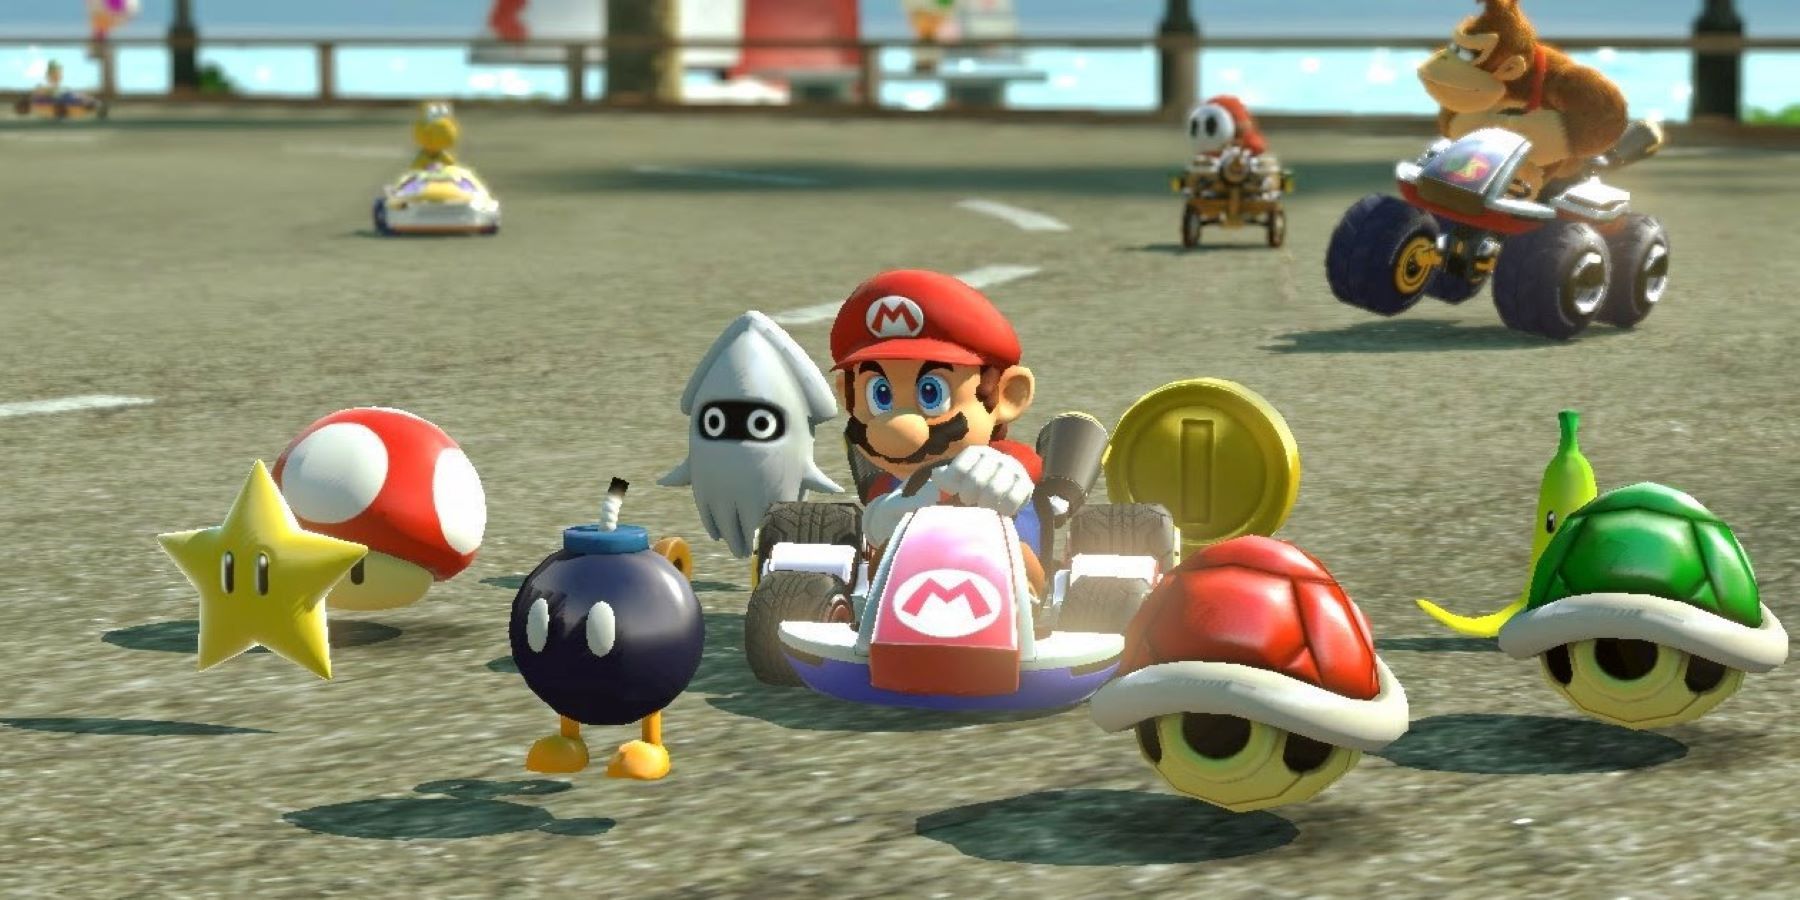 Mario driving a kart in Mario Kart 8 and using the Crazy Eight item, with Donkey Kong, Shy Guy, and Koopa Troopa in the background